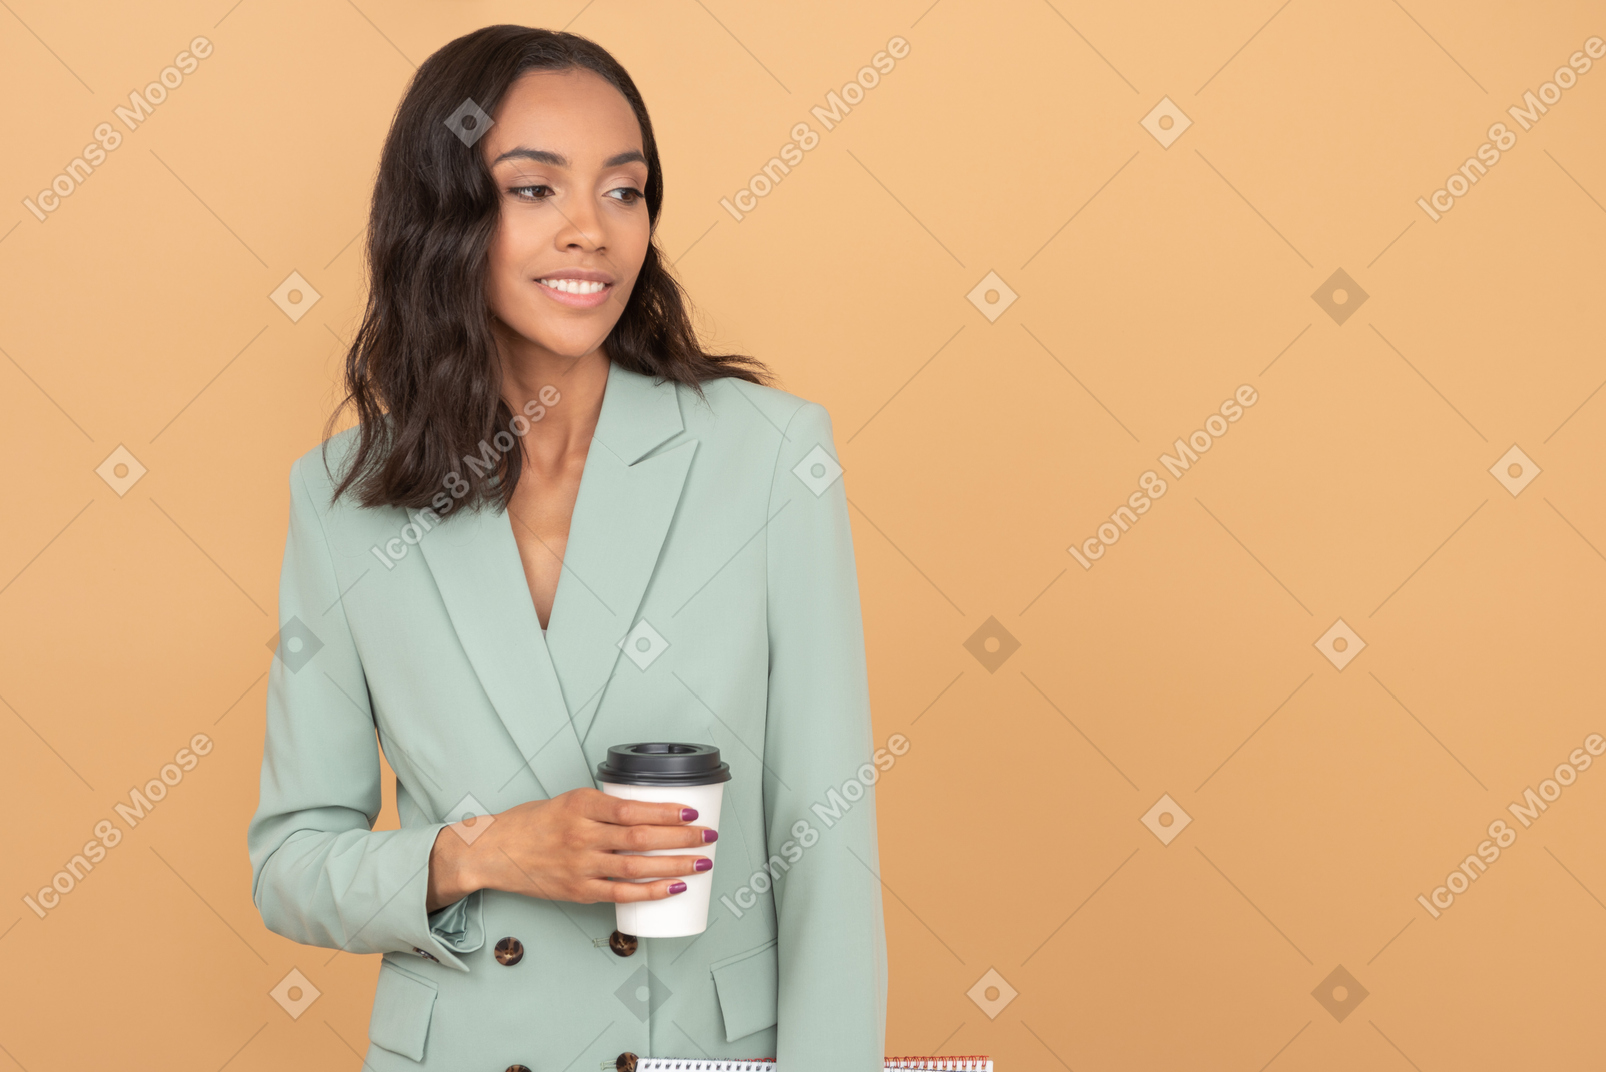 Elegant young businesswoman holding a cup of coffee